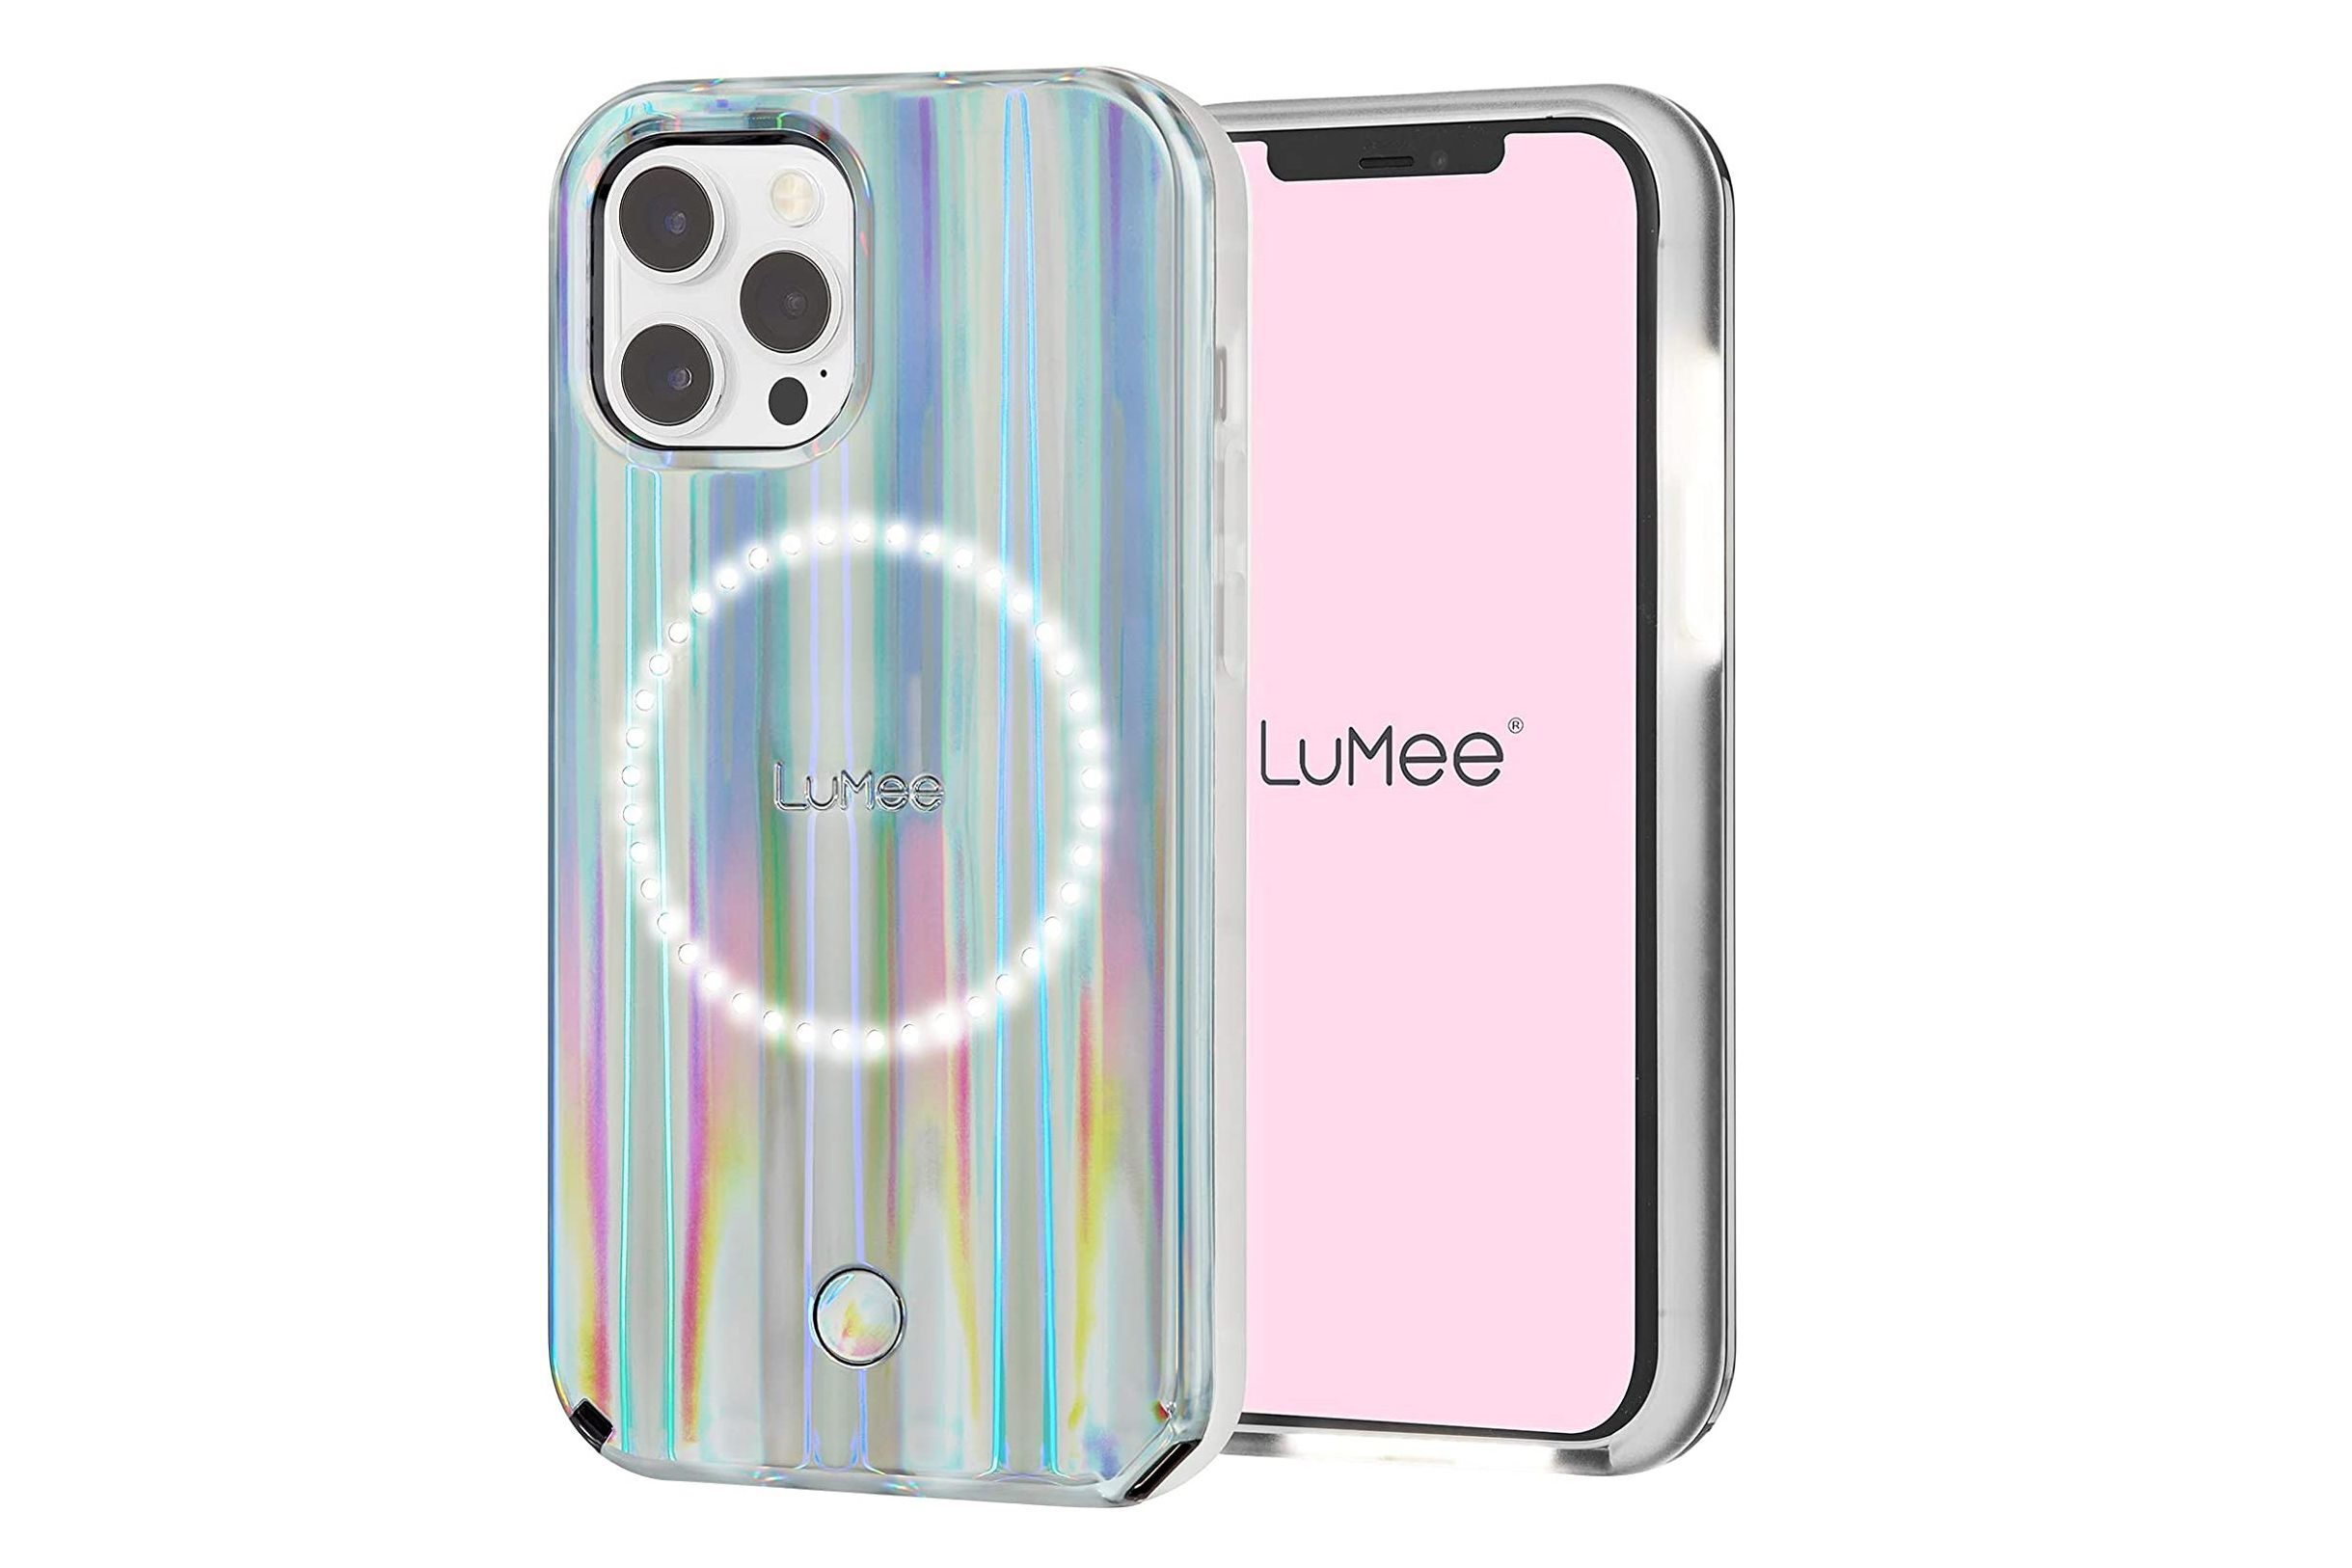 LuMee Halo iPhone 12 Pro Max case - The best iPhone 12 Pro Max cases - our top list